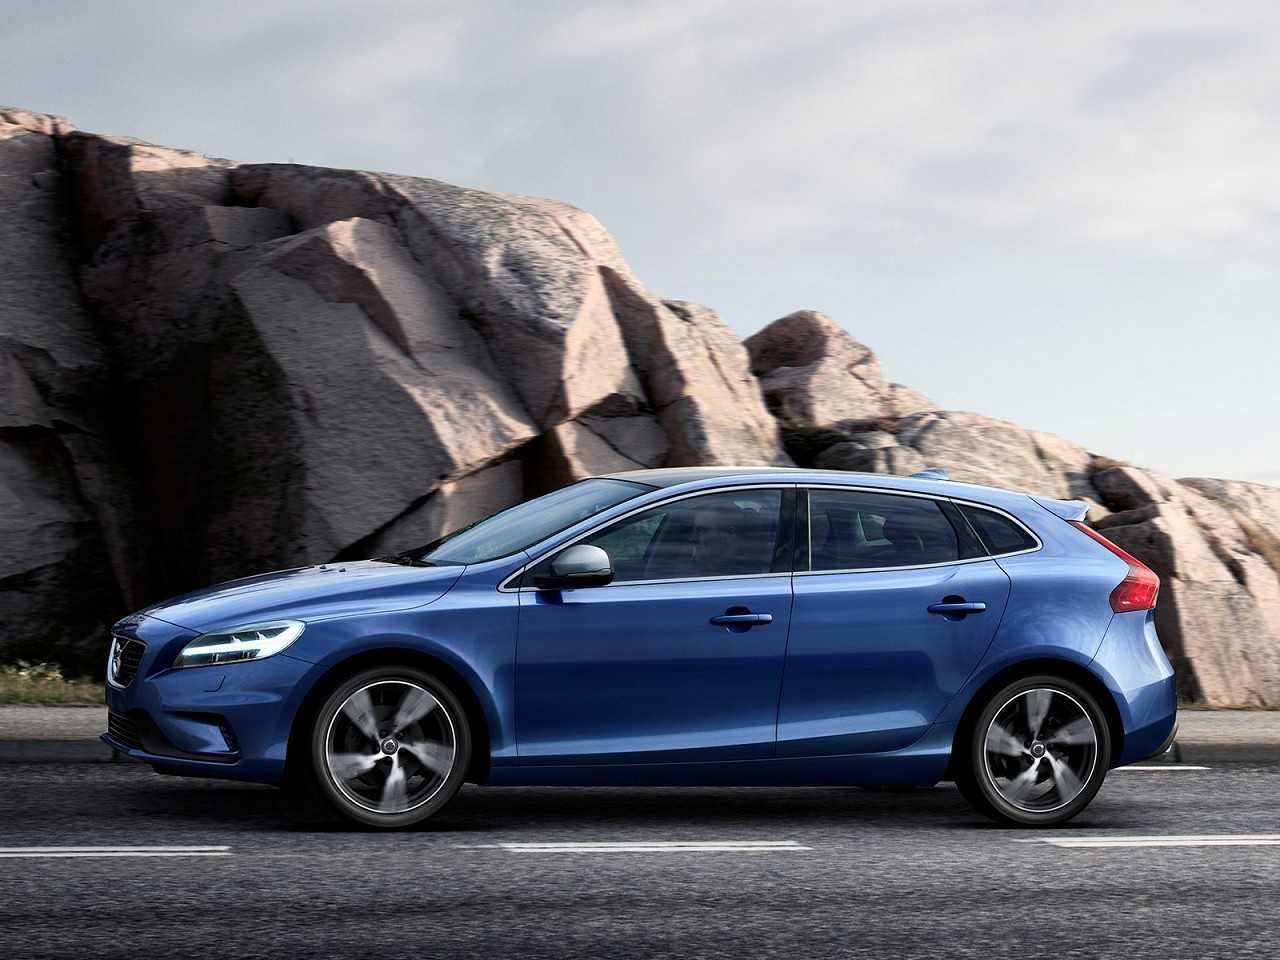 VolvoV40 2017 - lateral